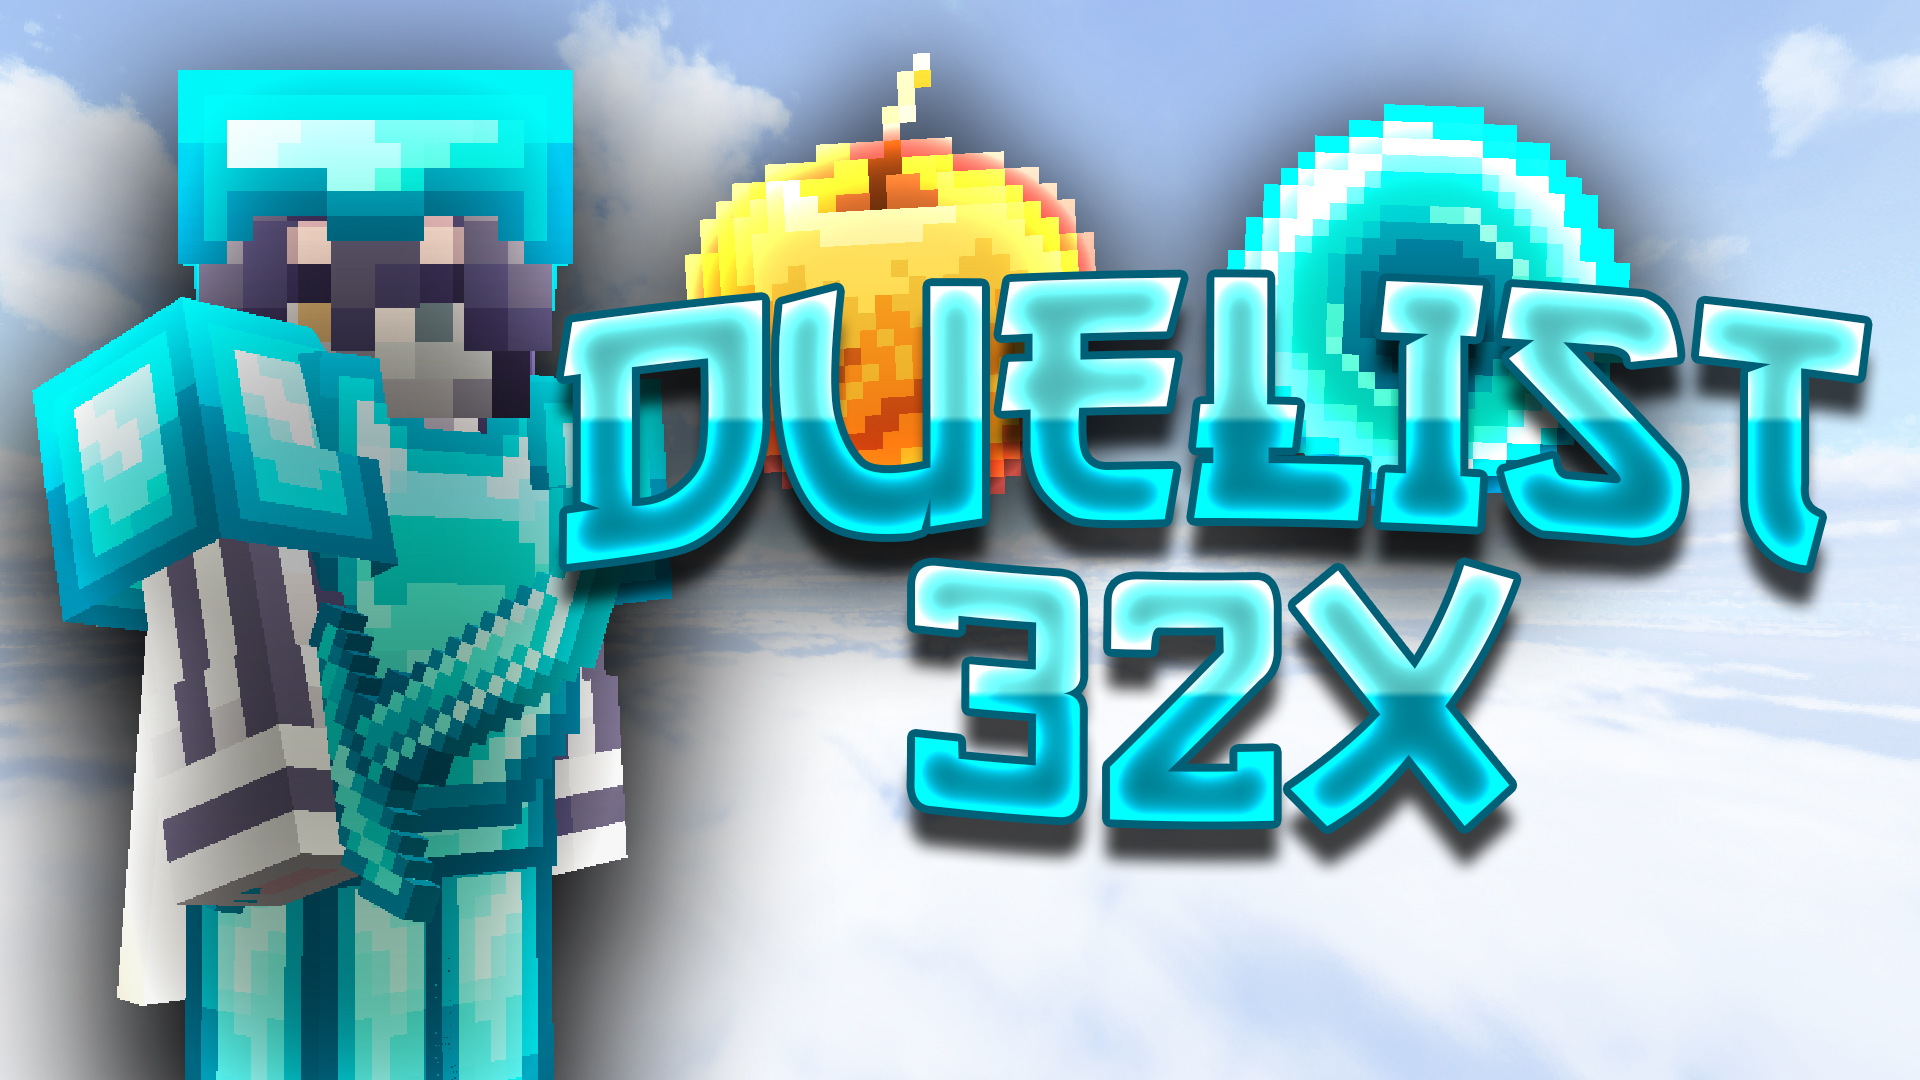 Duelist 32x by krispit on PvPRP